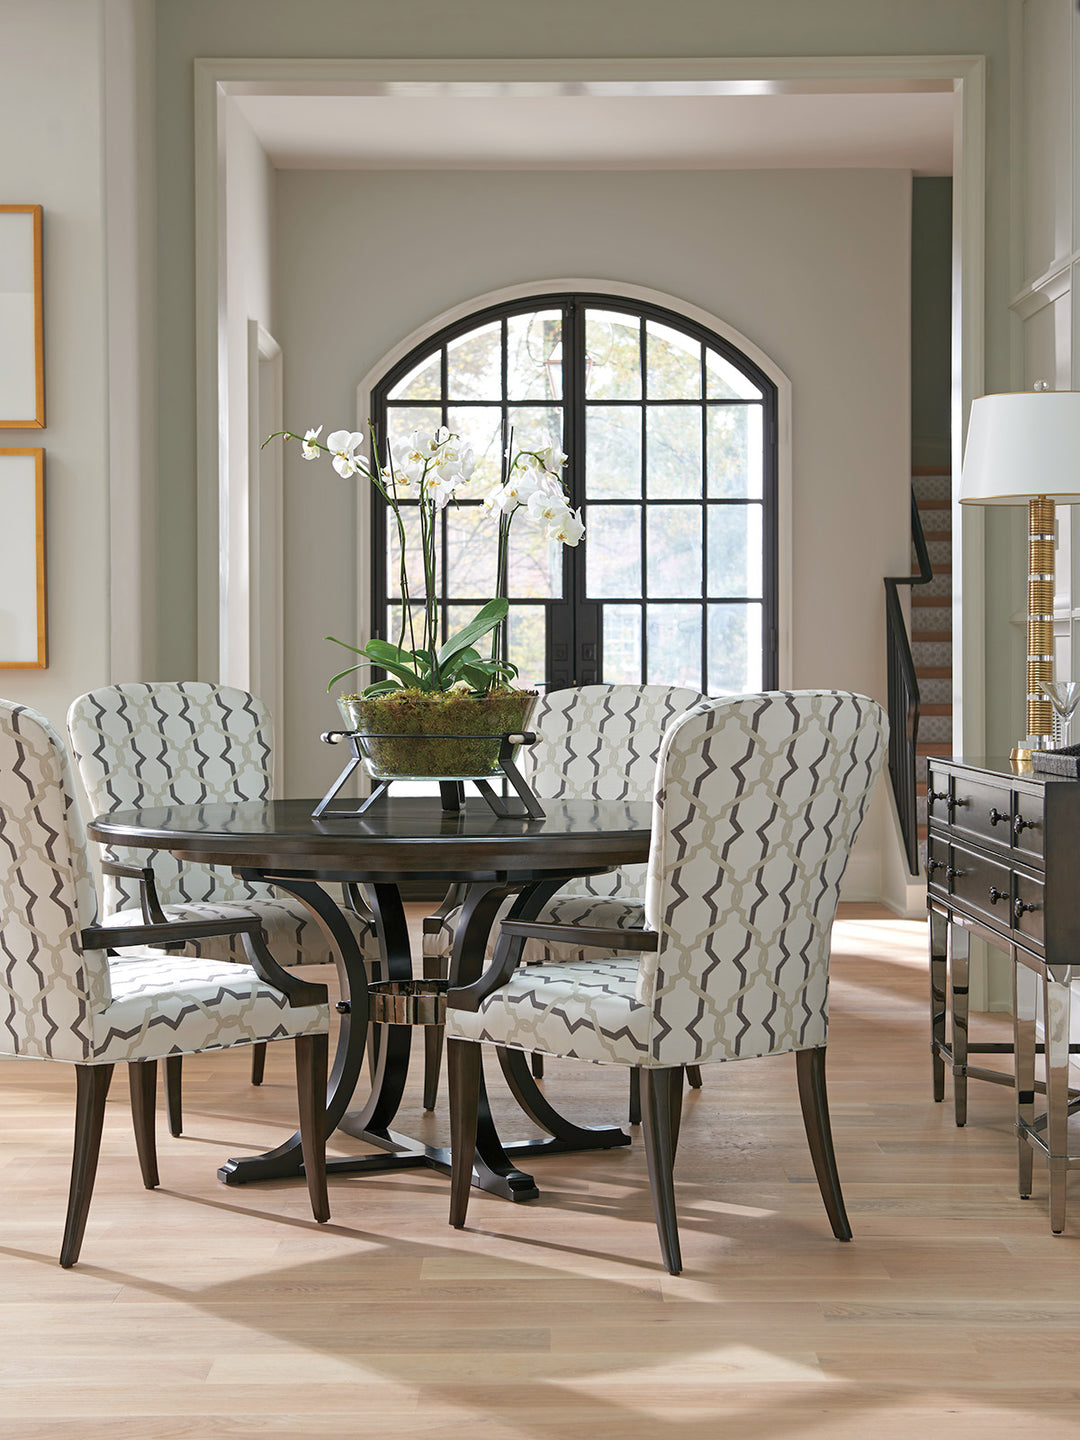 American Home Furniture | Barclay Butera  - Brentwood Layton Dining Table